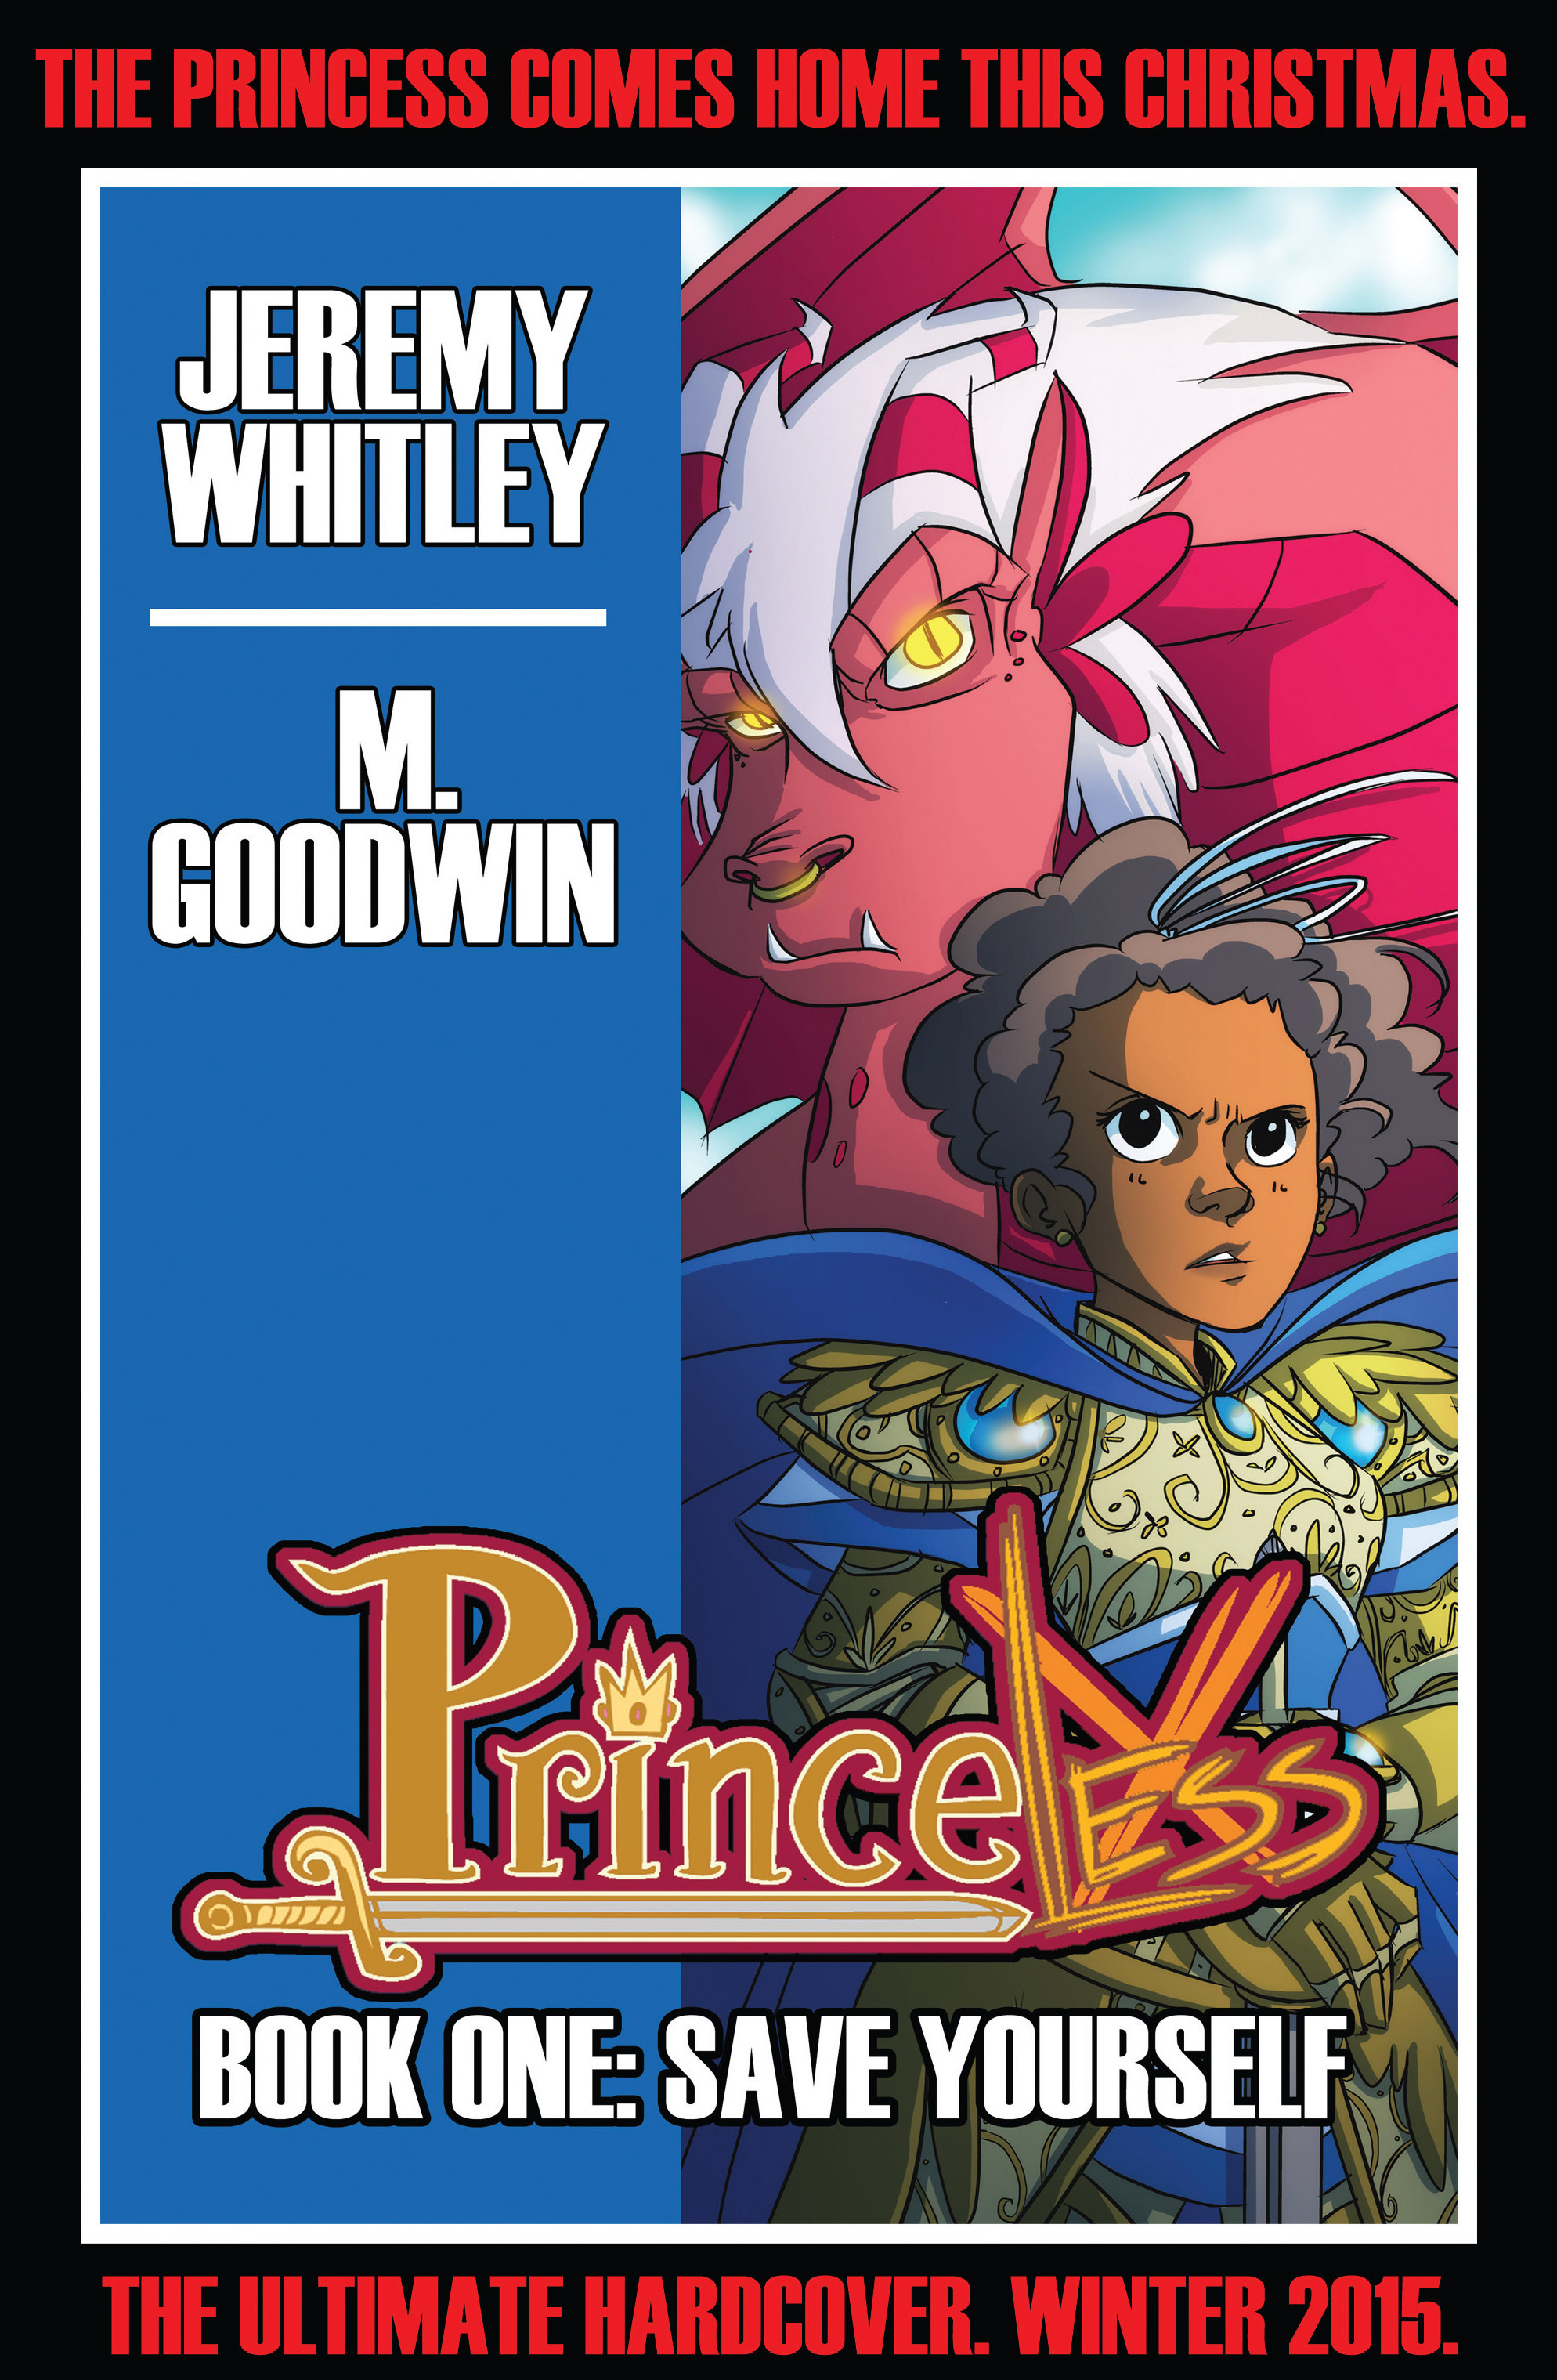 Read online Princeless: Make Yourself comic -  Issue #0 - 21